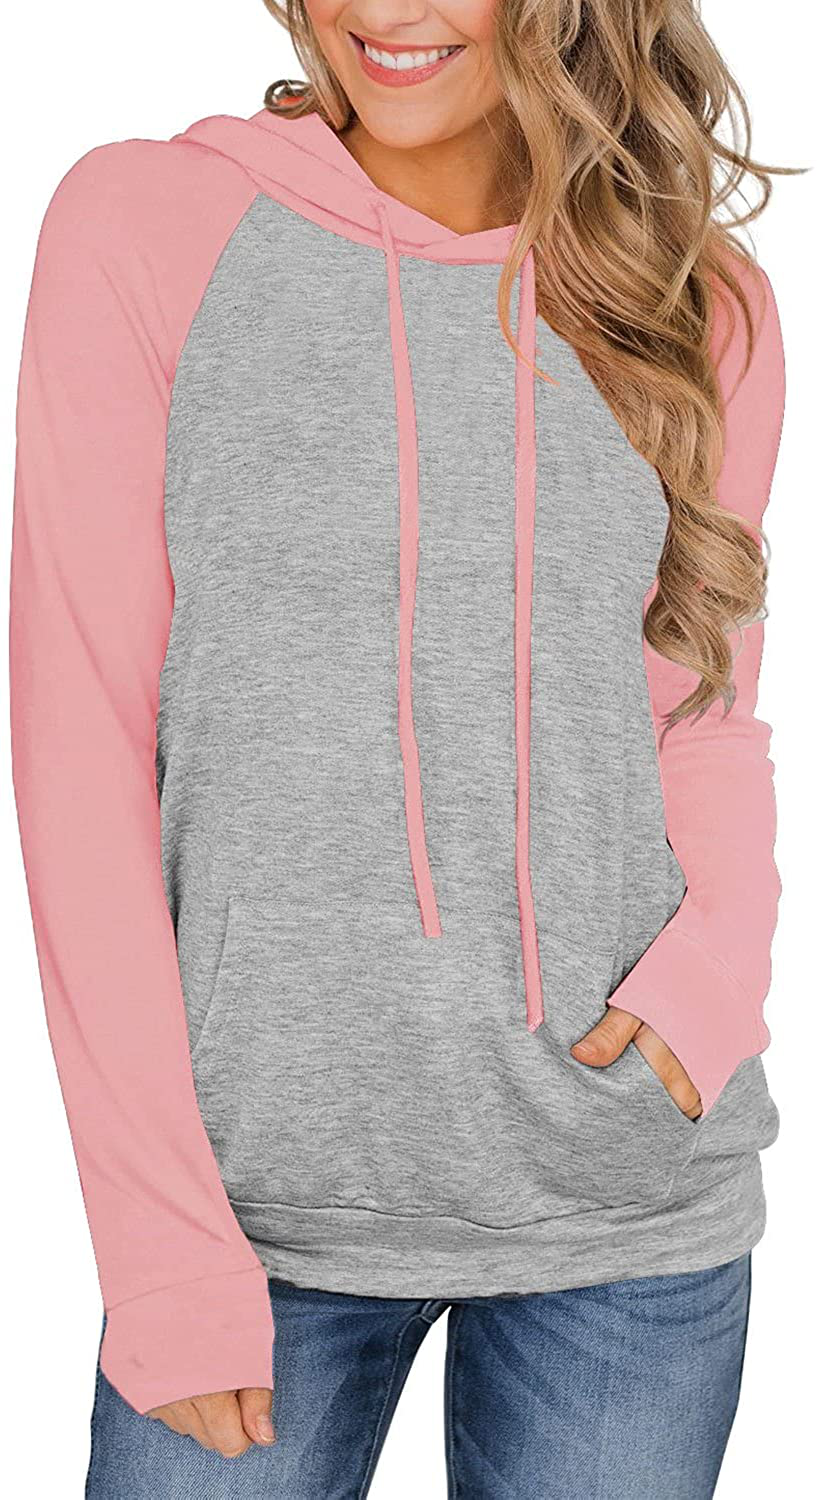 PINKMSTYLE Womens Color Block Hoodies Casual lightweight Drawstring Pullover Sweatshirt Fall Long Sleeve Tops with Pocket